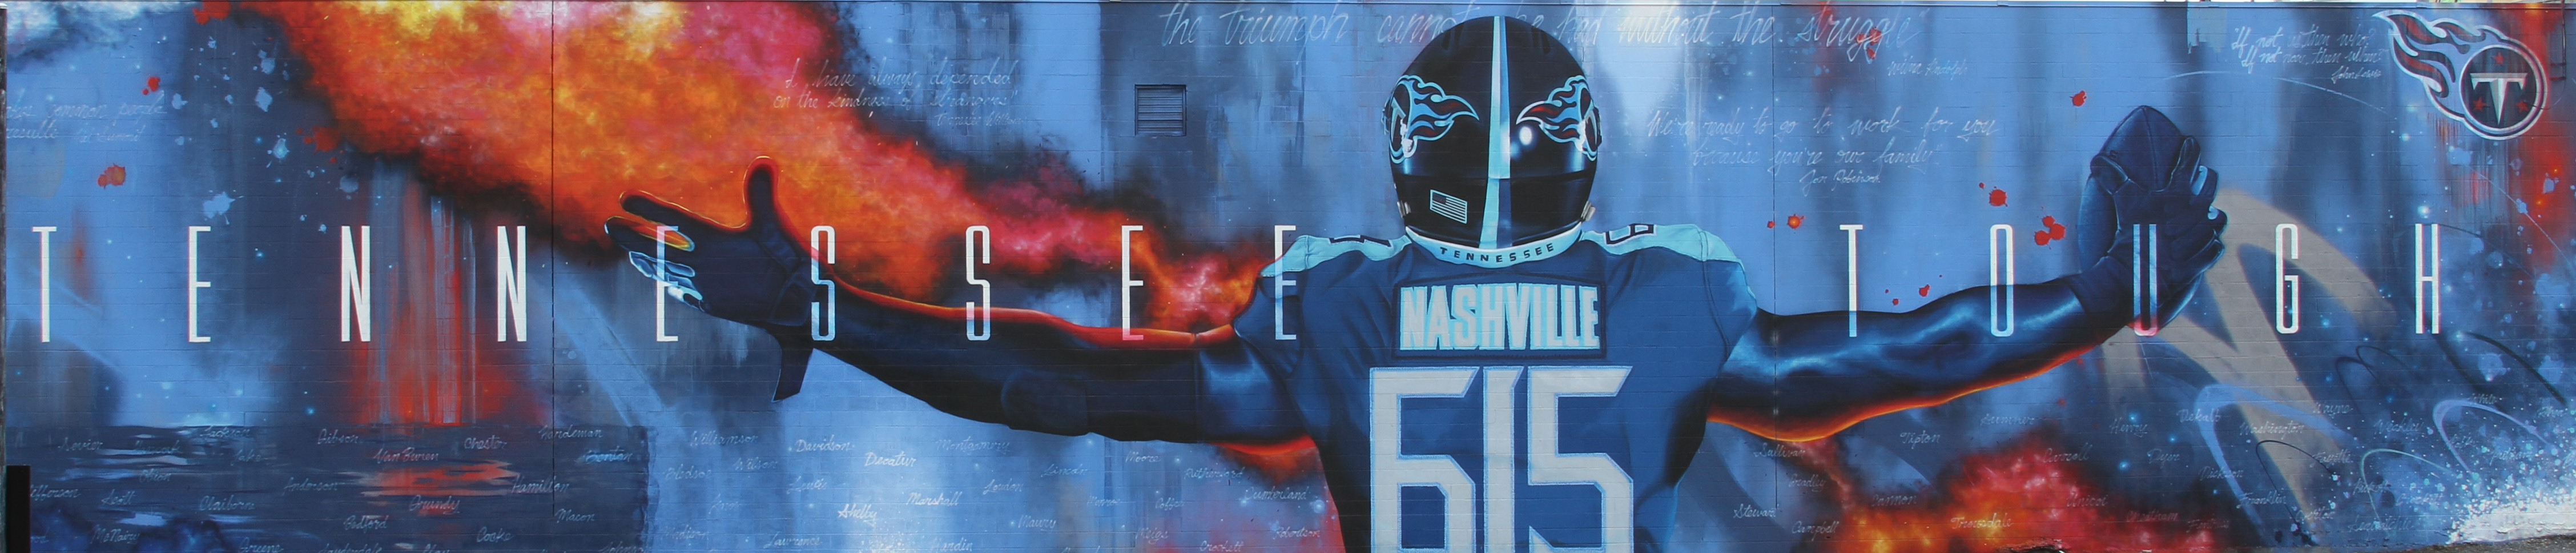 Eric “Mobe” Bass’s mural for the Tennessee Titans in Nashville.